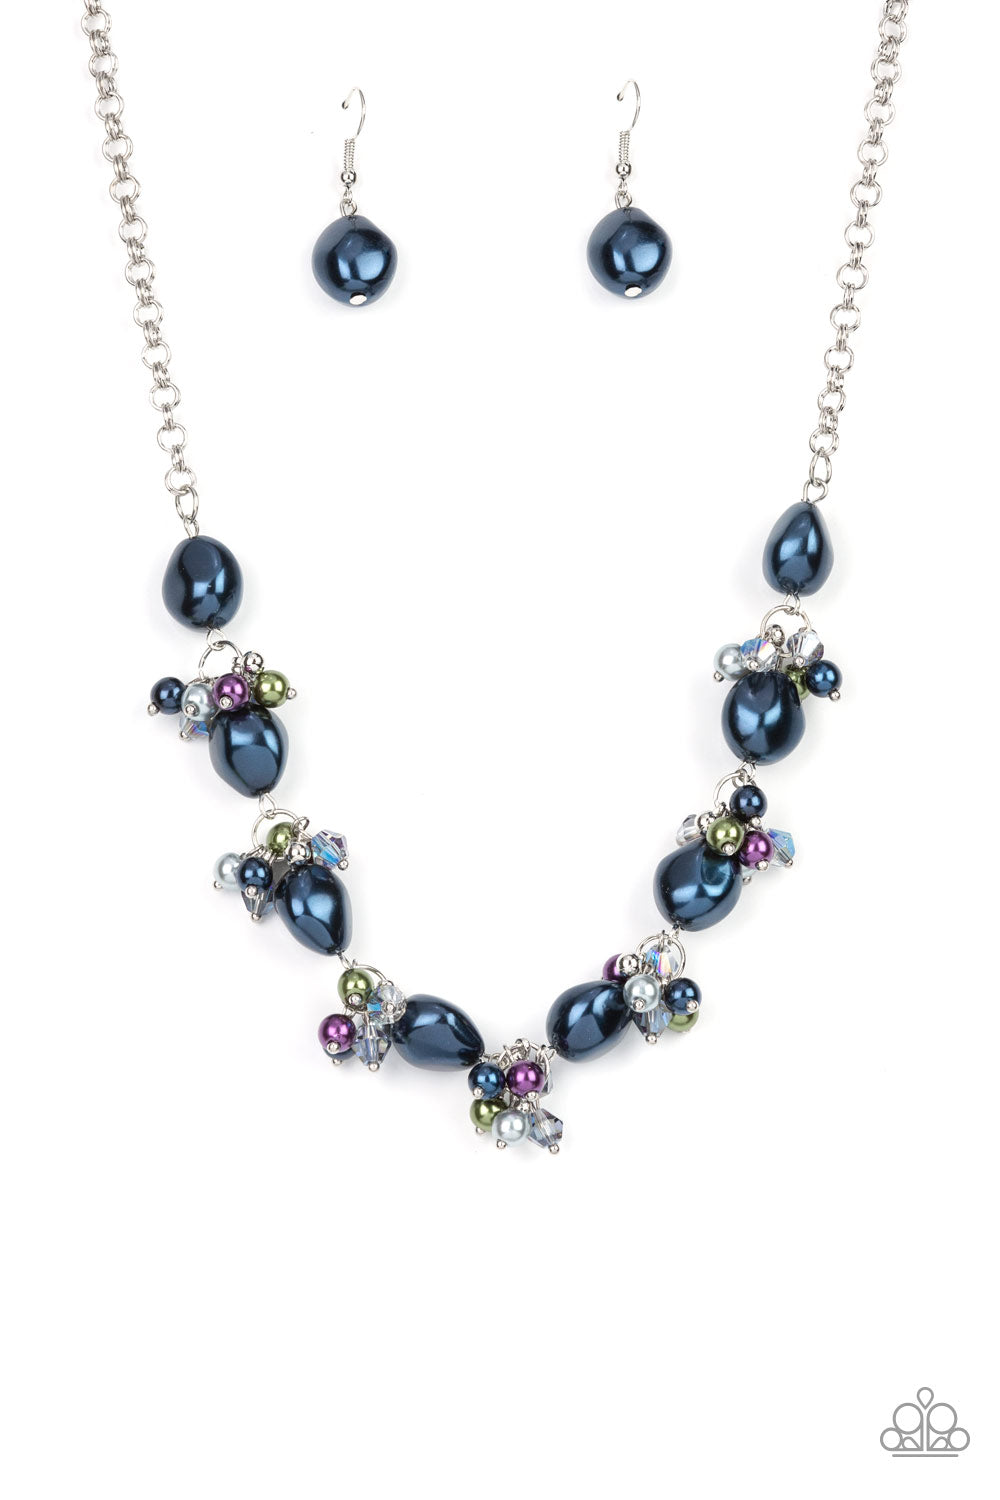 Rolling with the BRUNCHES - Multi Necklace freeshipping - JewLz4u Gemstone Gallery